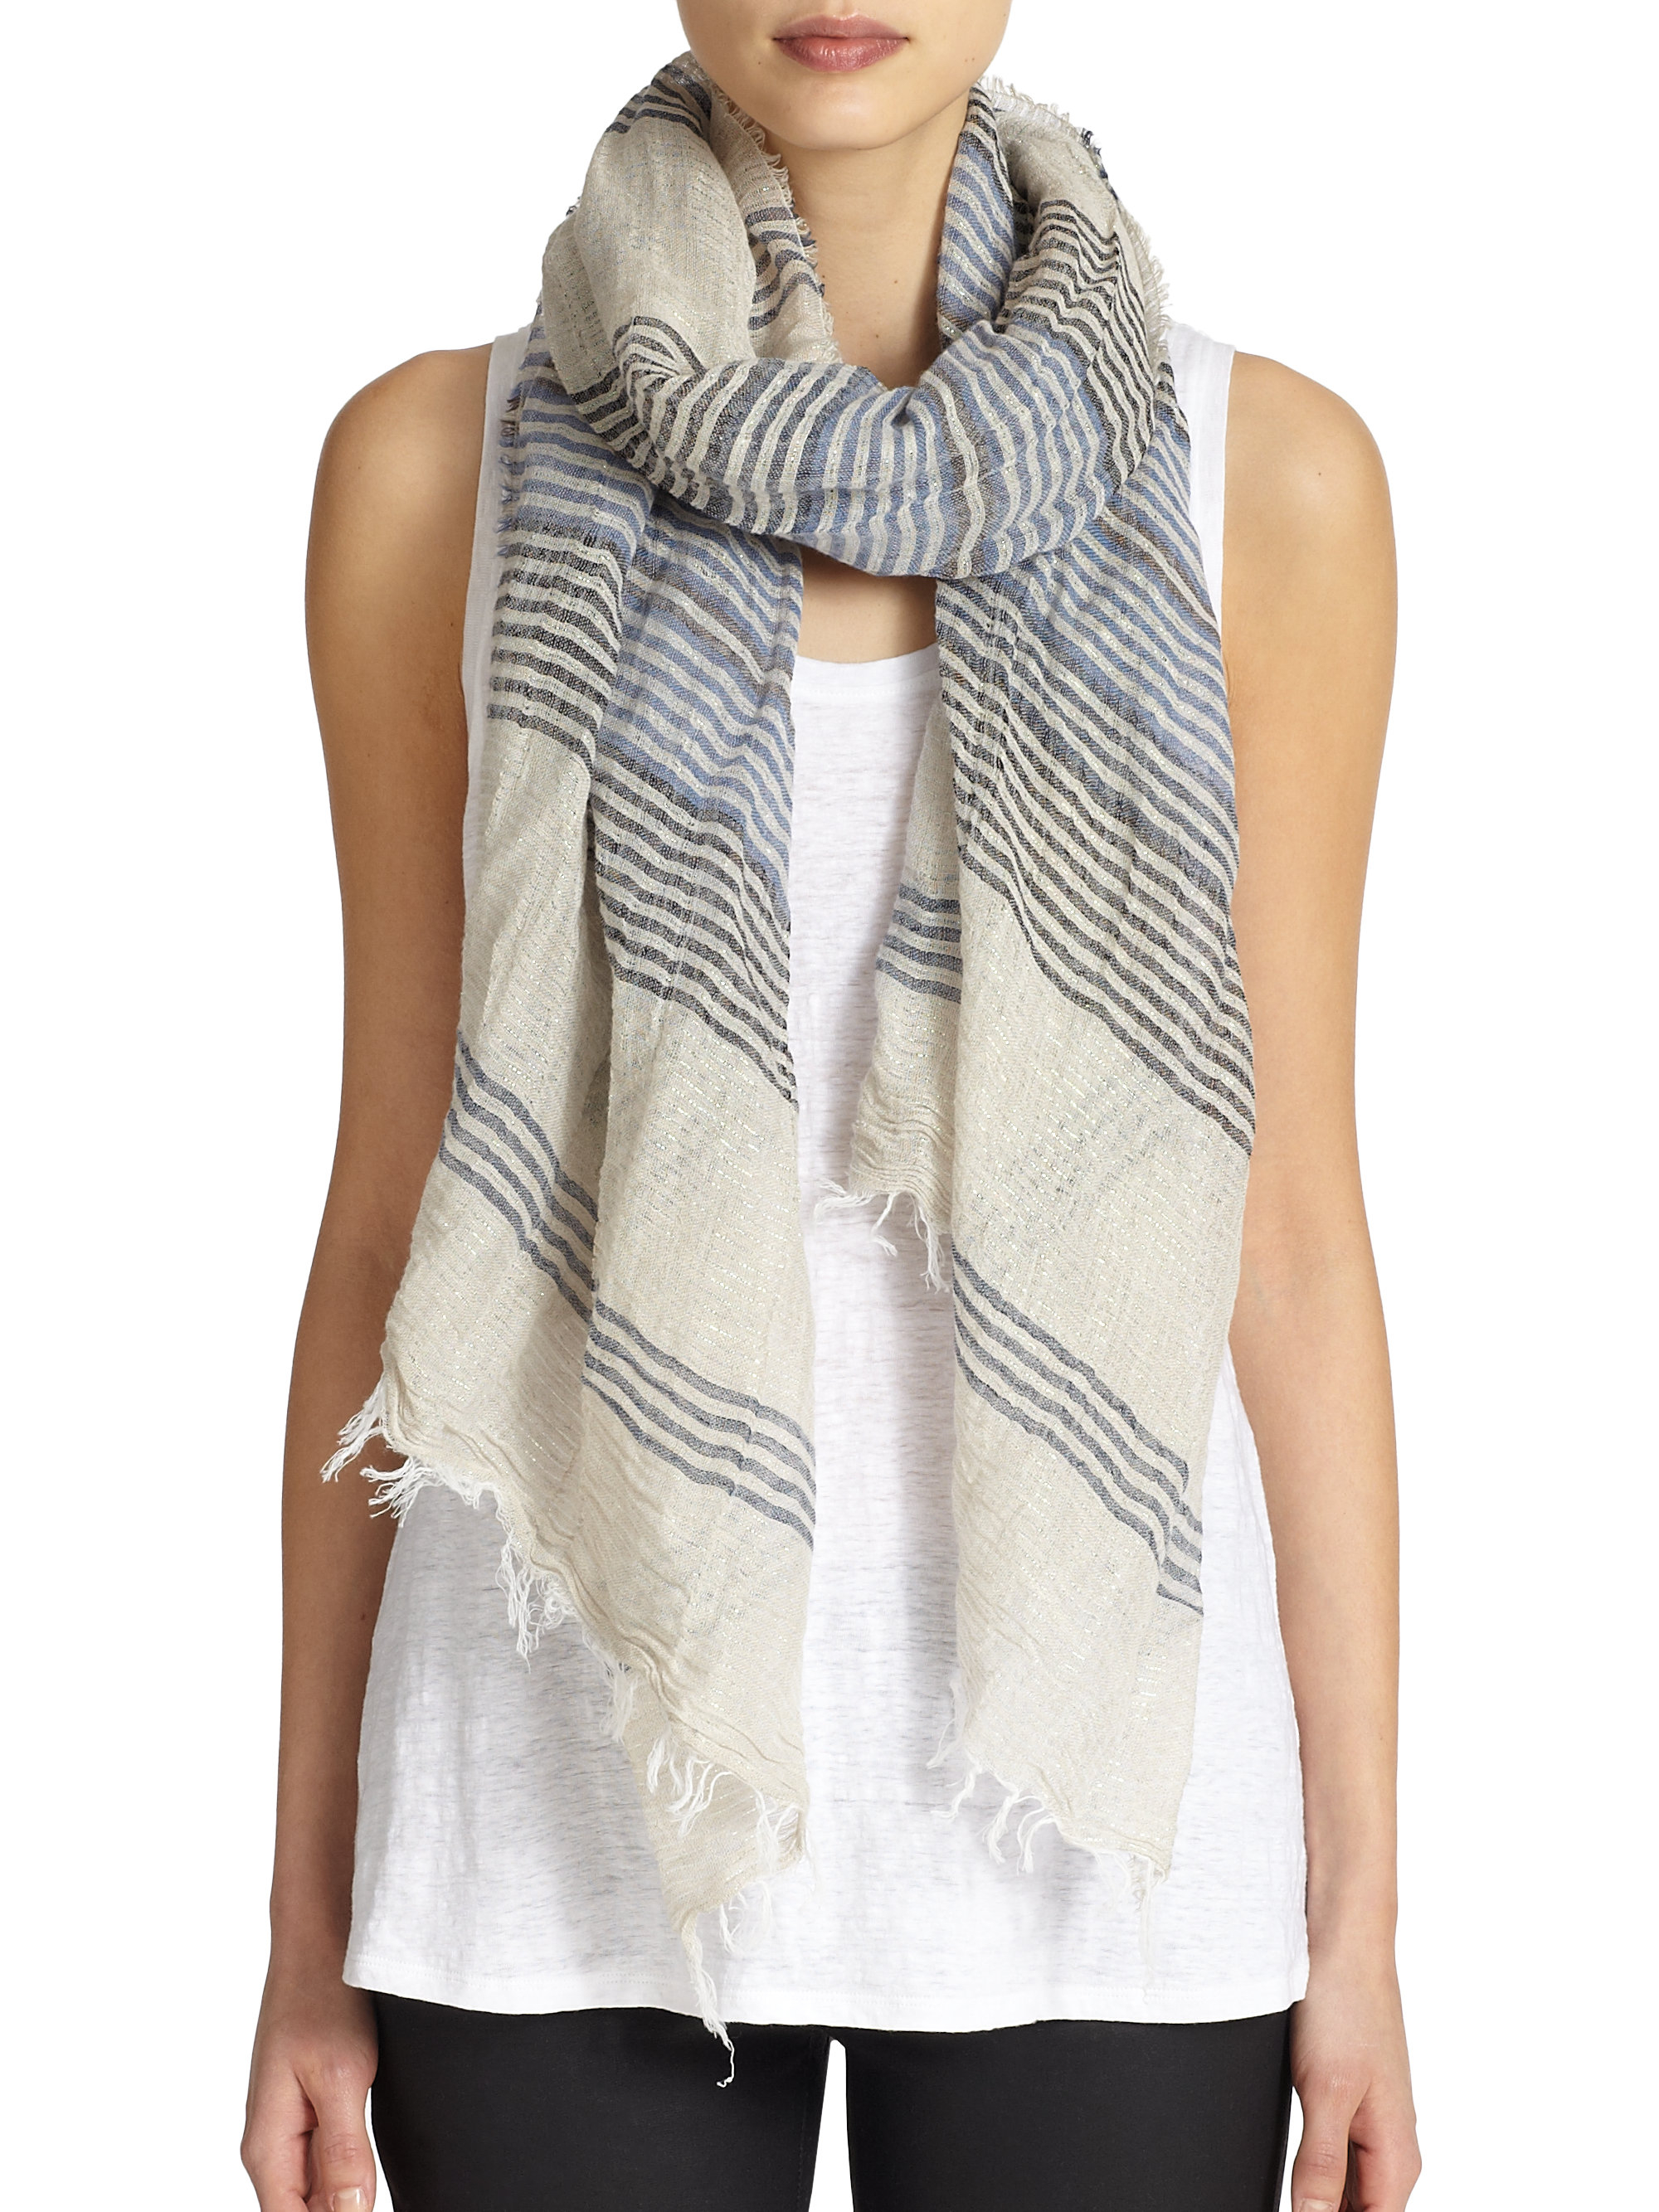 Lyst Eileen Fisher Linen & Cotton Striped Scarf in Gray